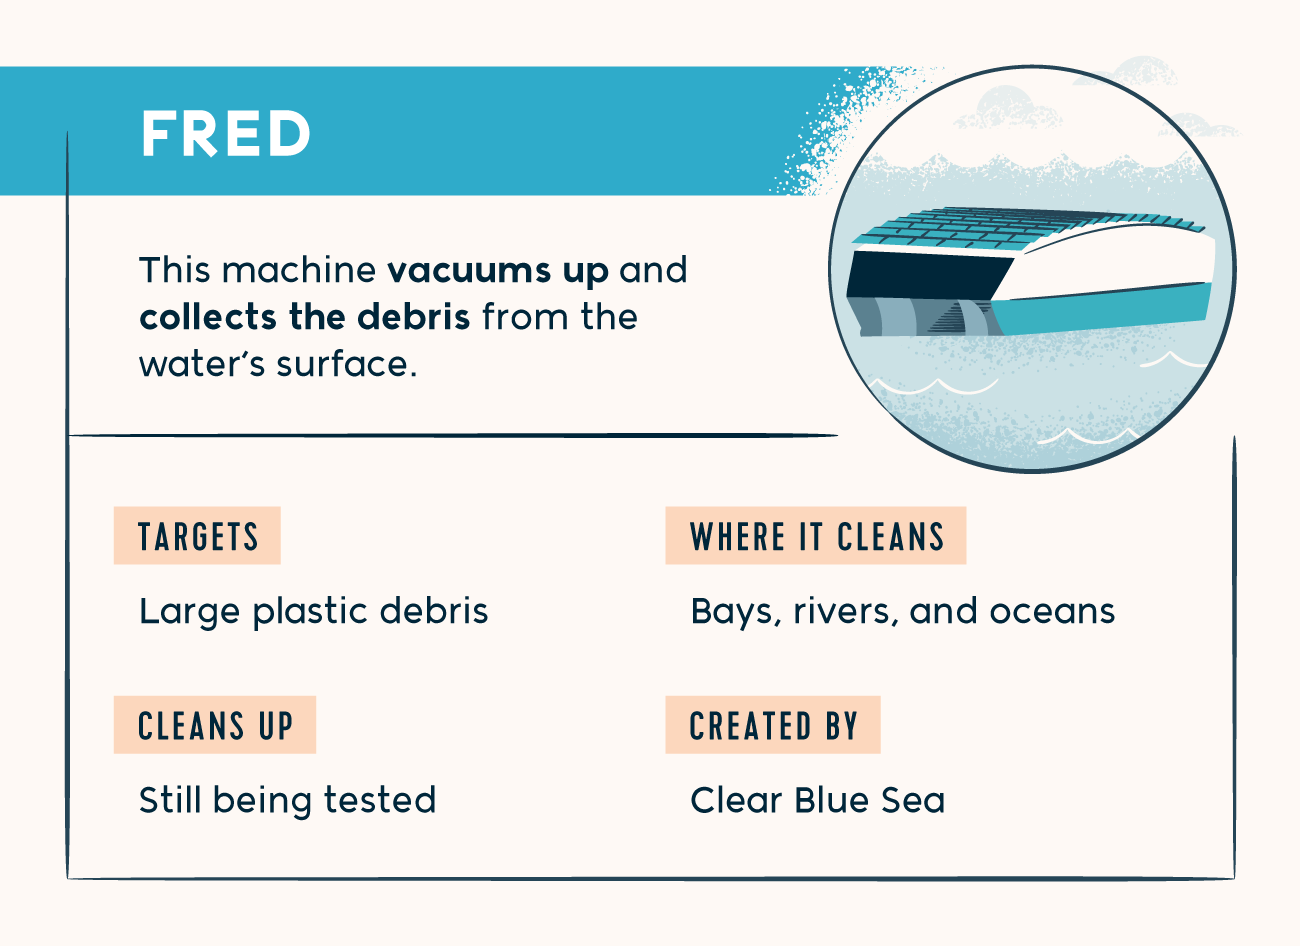 FRED clear blue sea invention vacuums up and collects debris from water surface